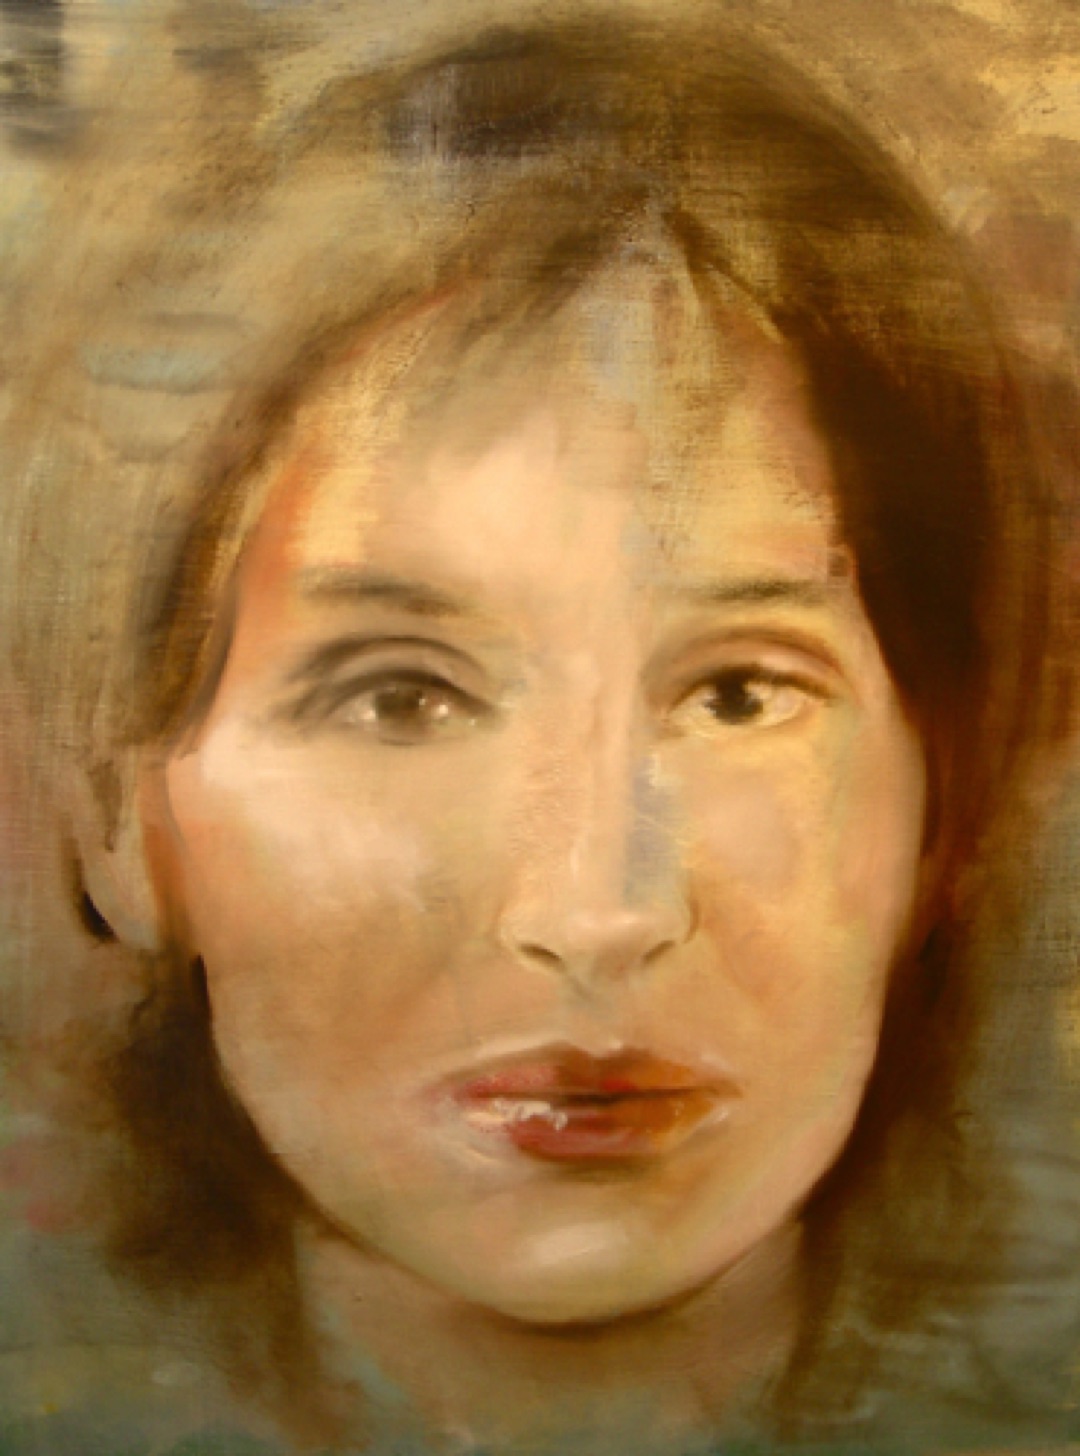 Gregg Chadwick
Yareli Arizmendi
40"x30"oil on linen 2011
Yareli is a  brilliant actress, writer, and director 
She rose to prominence with her role as Rosaura in the film "Like Water for Chocolate." 
Yareli Arizmendi and Sergio Arau Collection, Hollywood, California